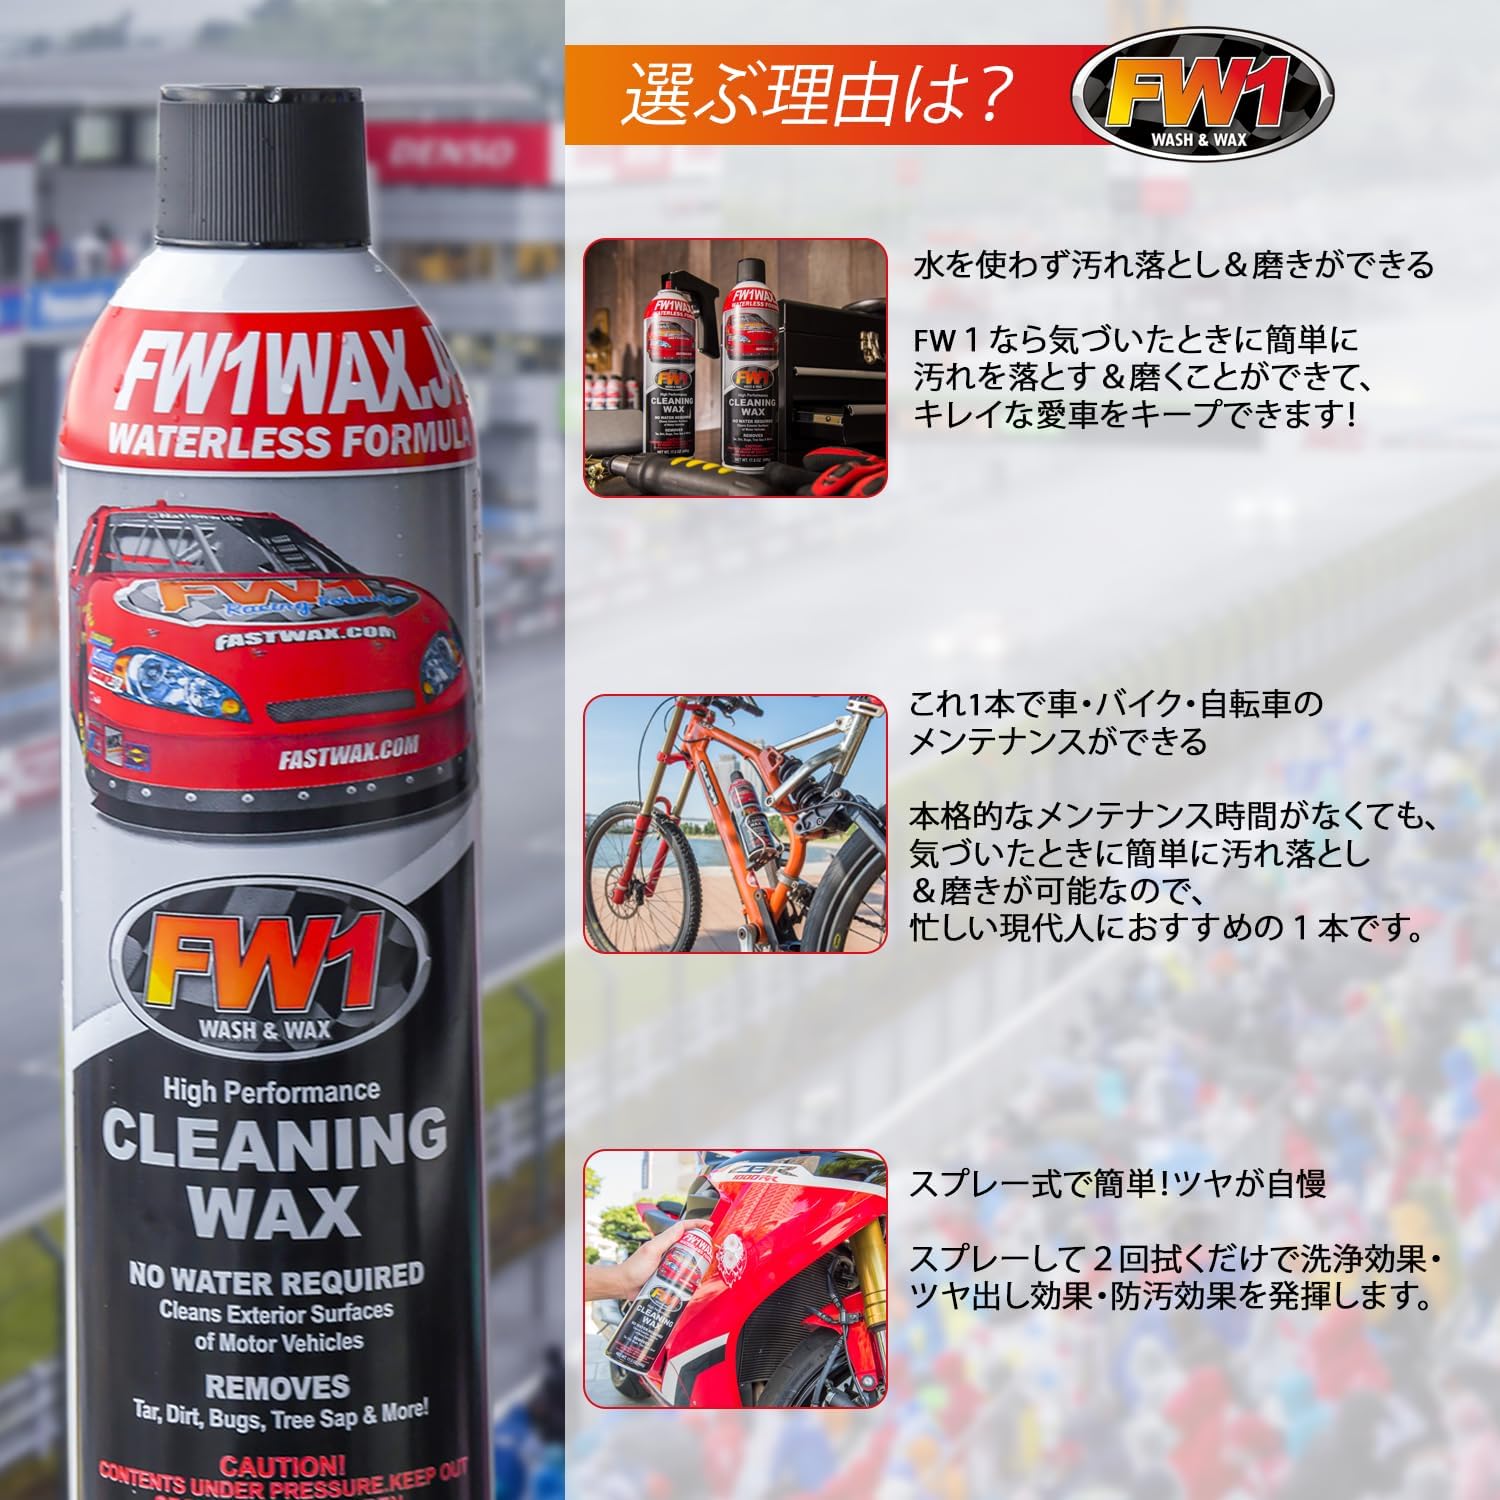 Graphic showing FW1 car wax can be used on bikes as well as motorcycles 